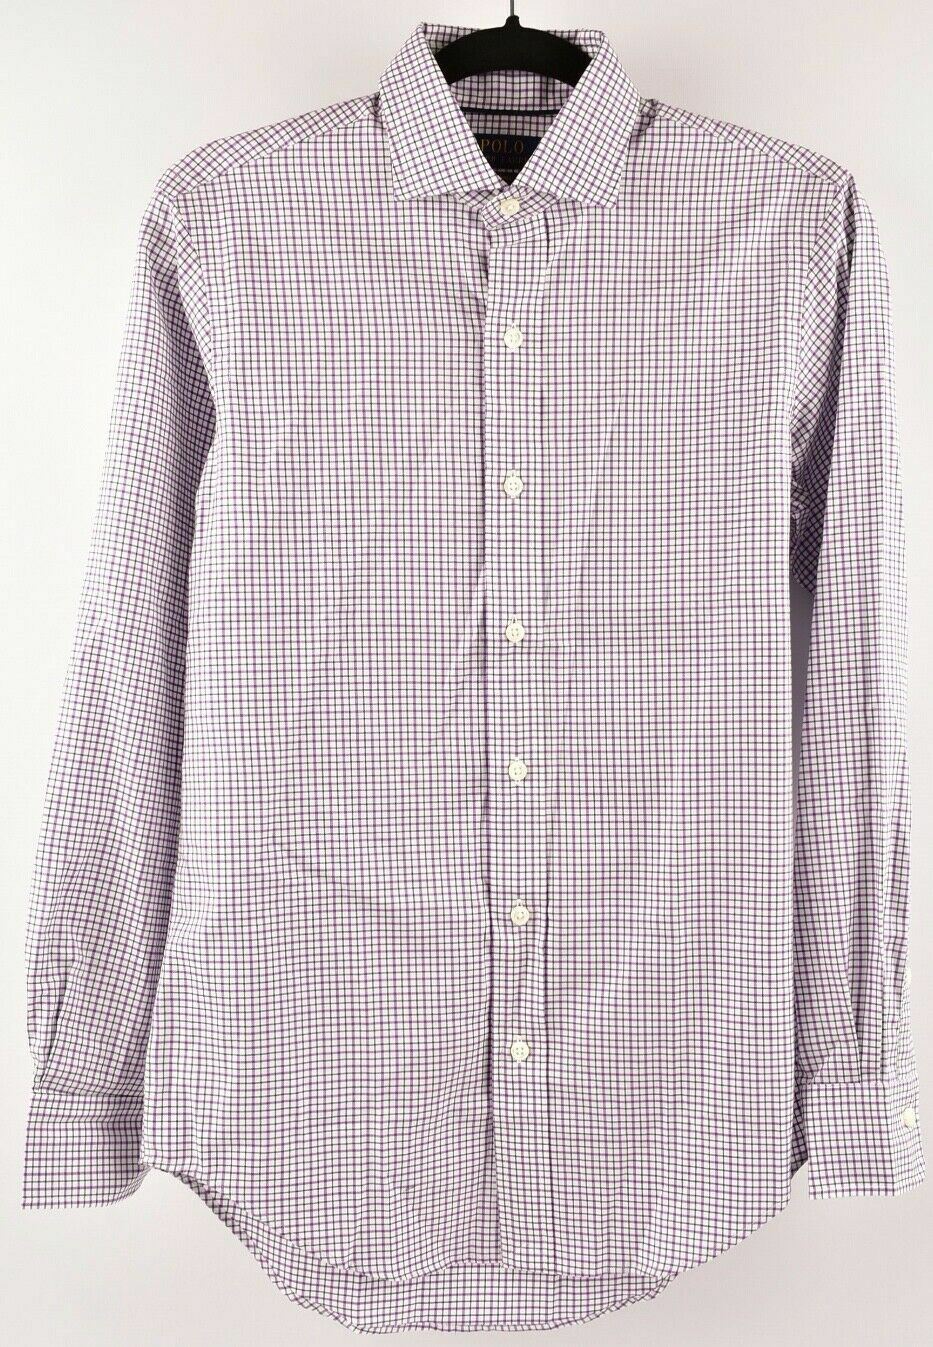 POLO RALPH LAUREN RL TWILL Mens Classic Shirt, Purple Checked, size XS size S